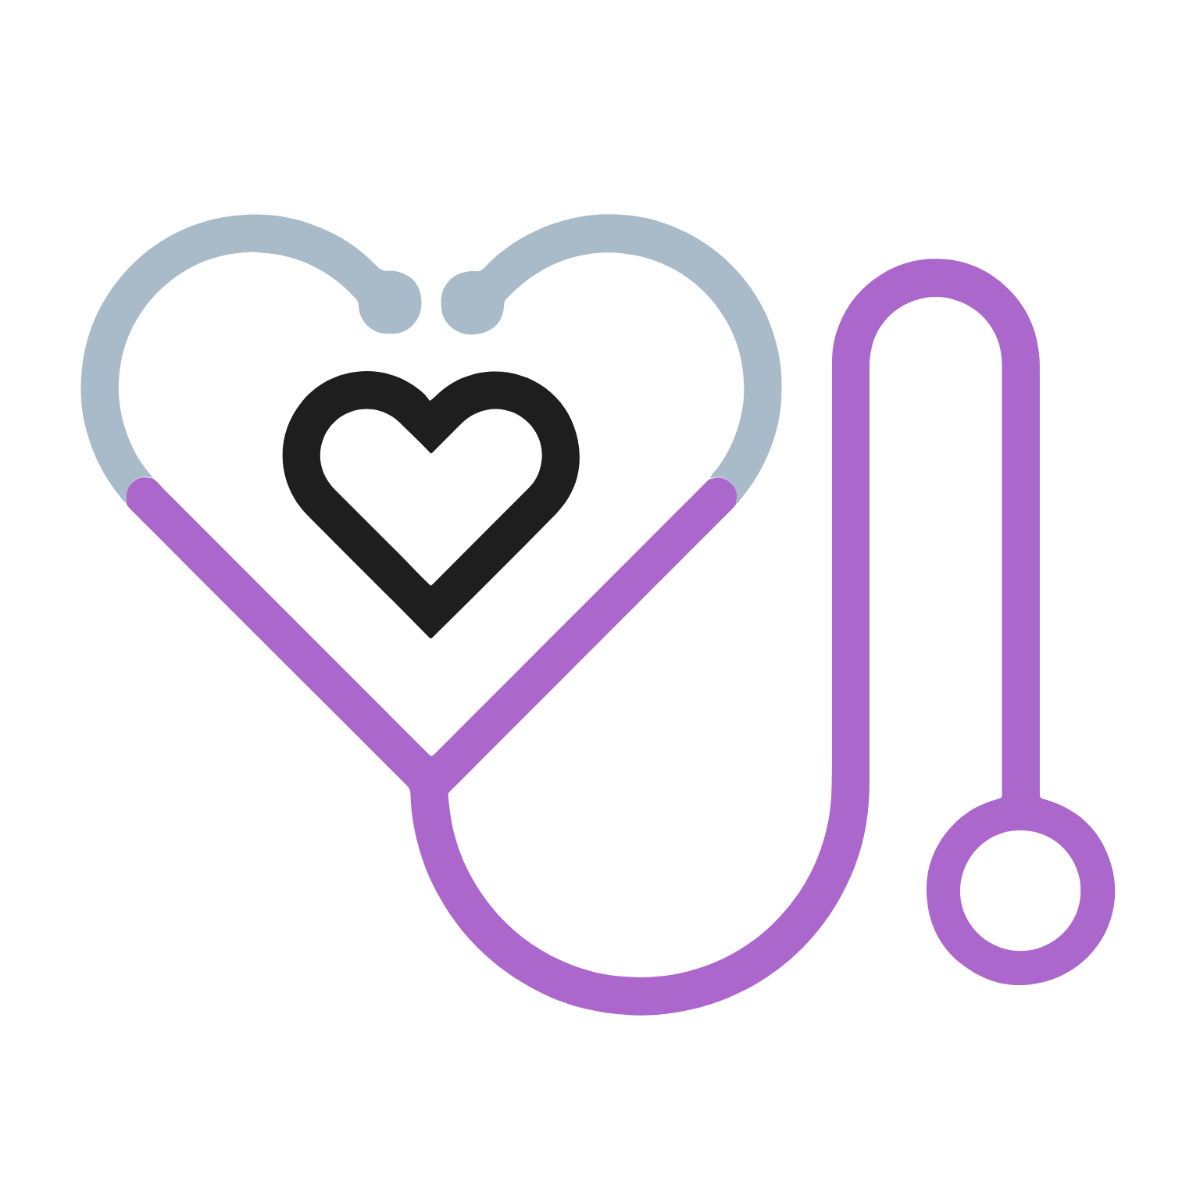 Health Care Logo With B Letter Concept Stethoscope Logo B Letter Concept  Phonendoscope Logotype Stock Illustration - Download Image Now - iStock